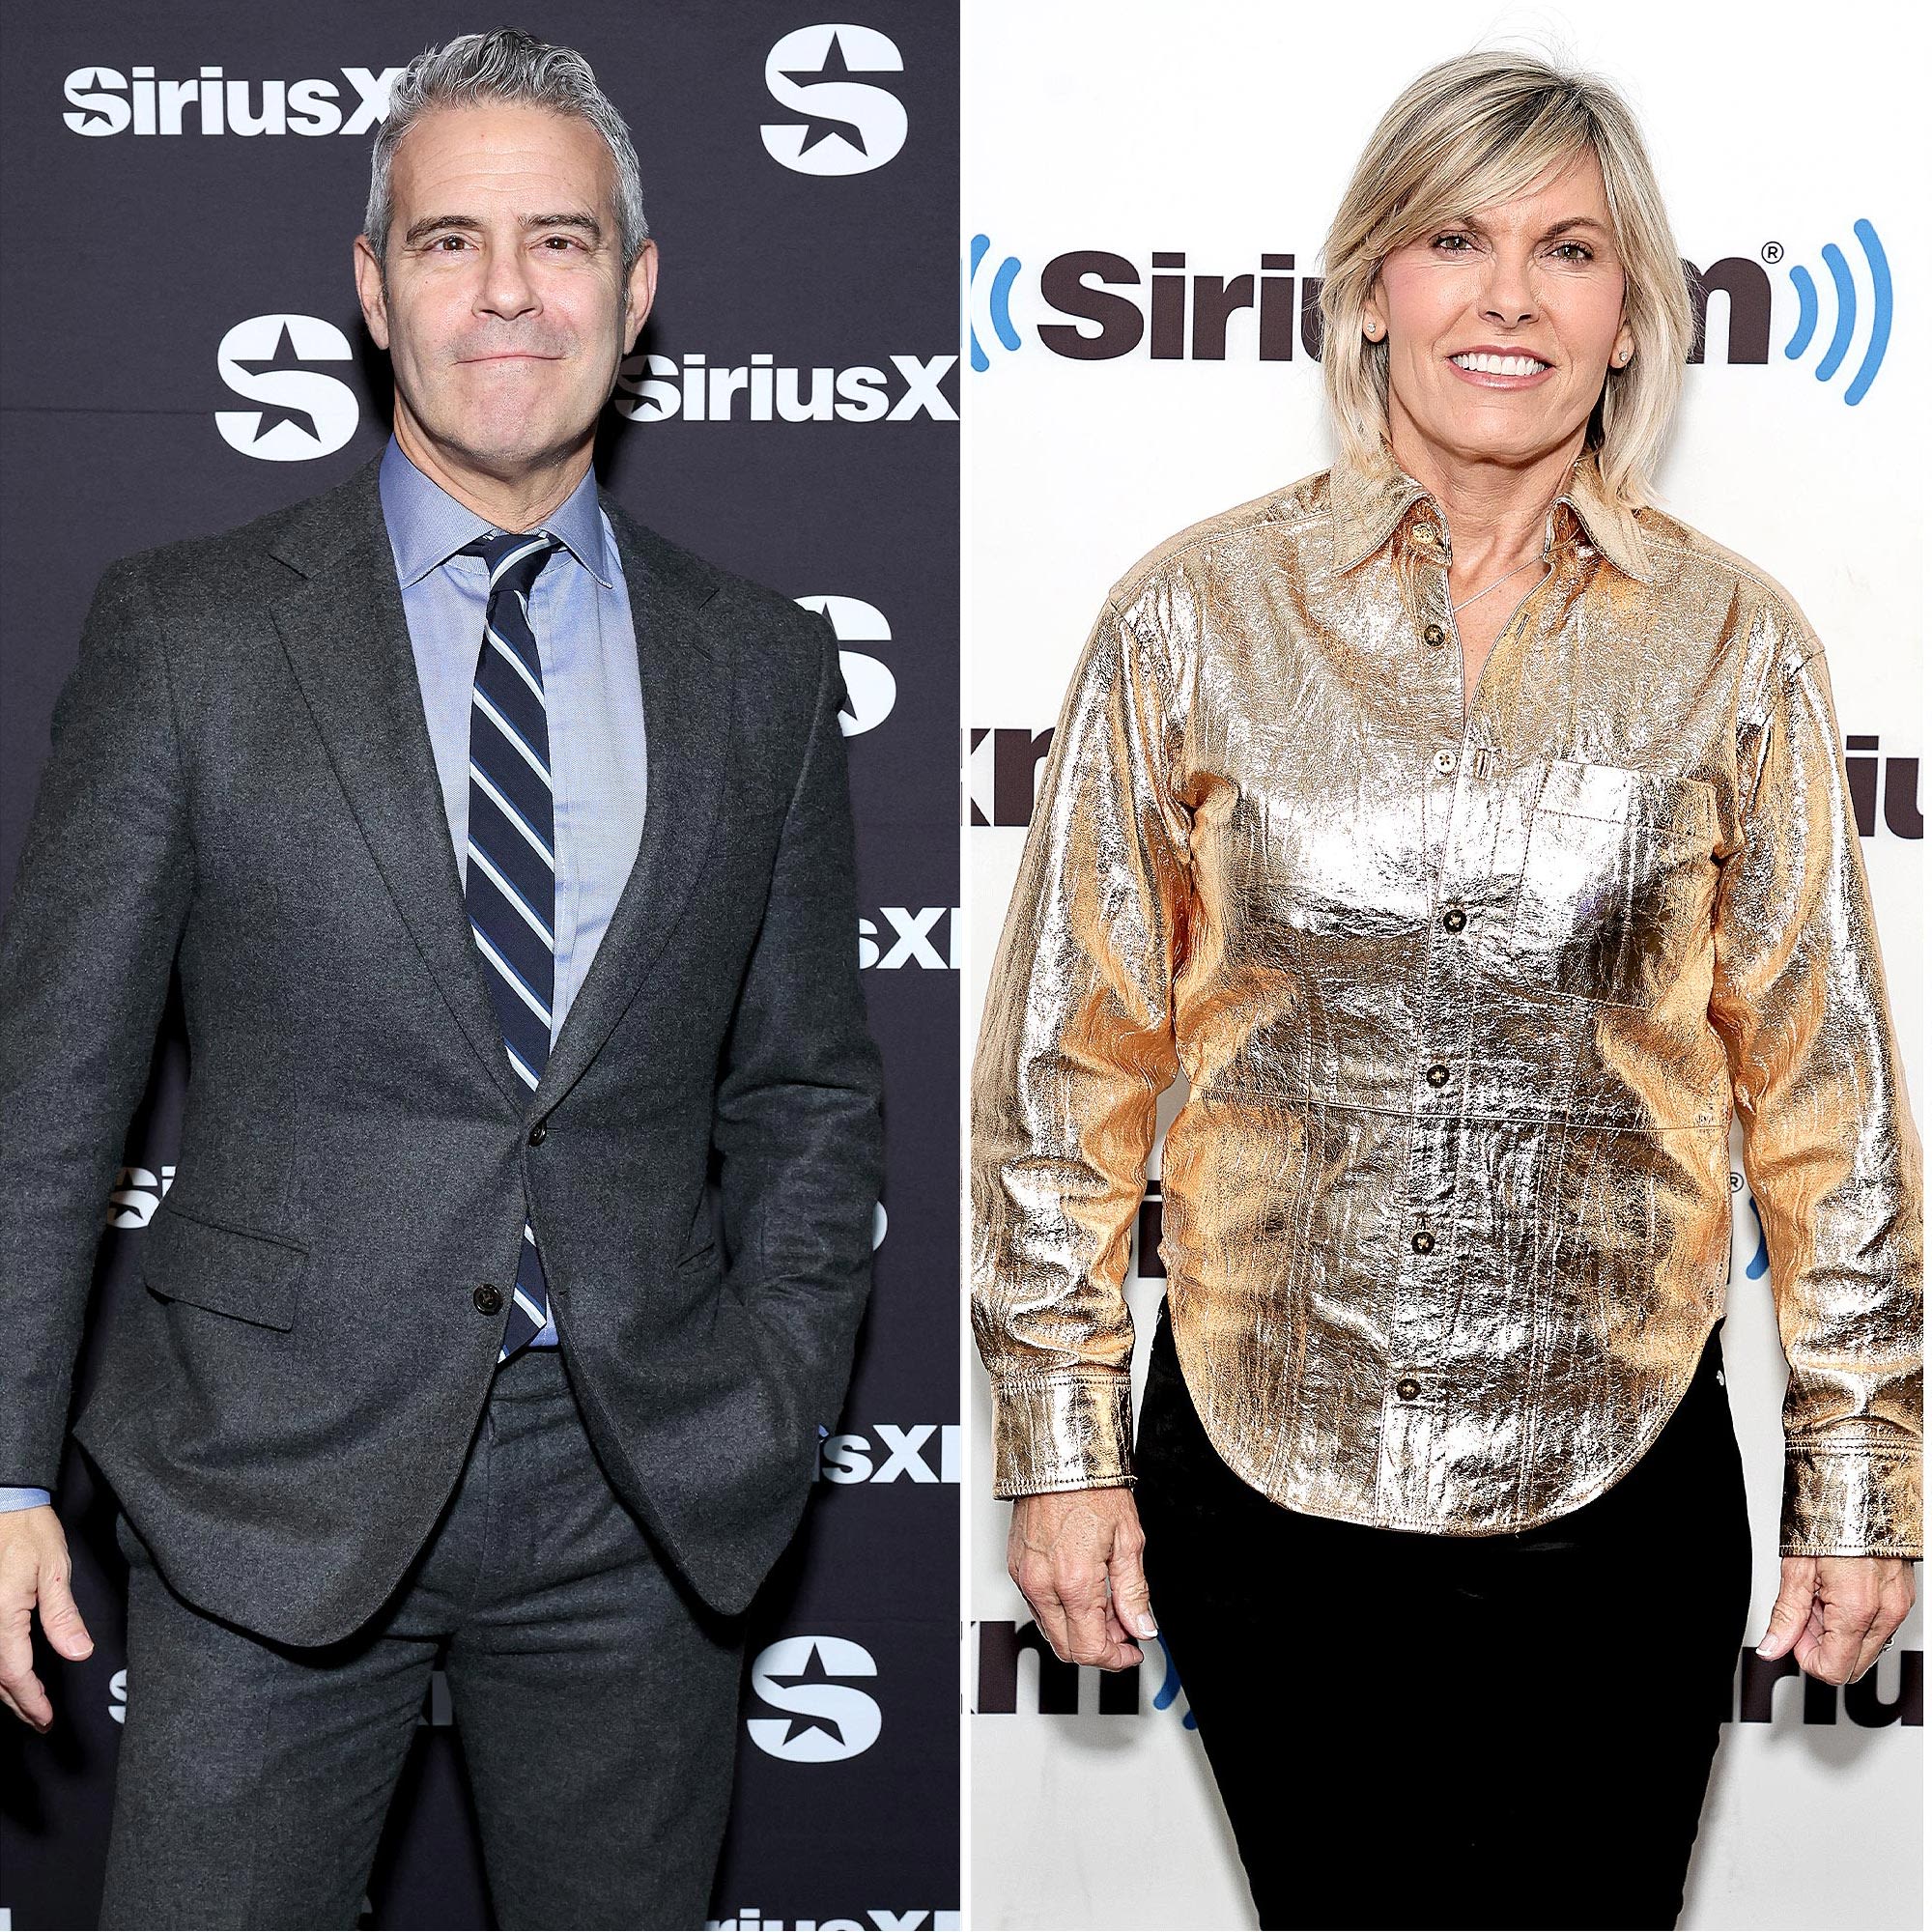 Andy Cohen Sent Below Deck’s Captain Sandy a ‘Generous Gift’ After Missing Her Wedding